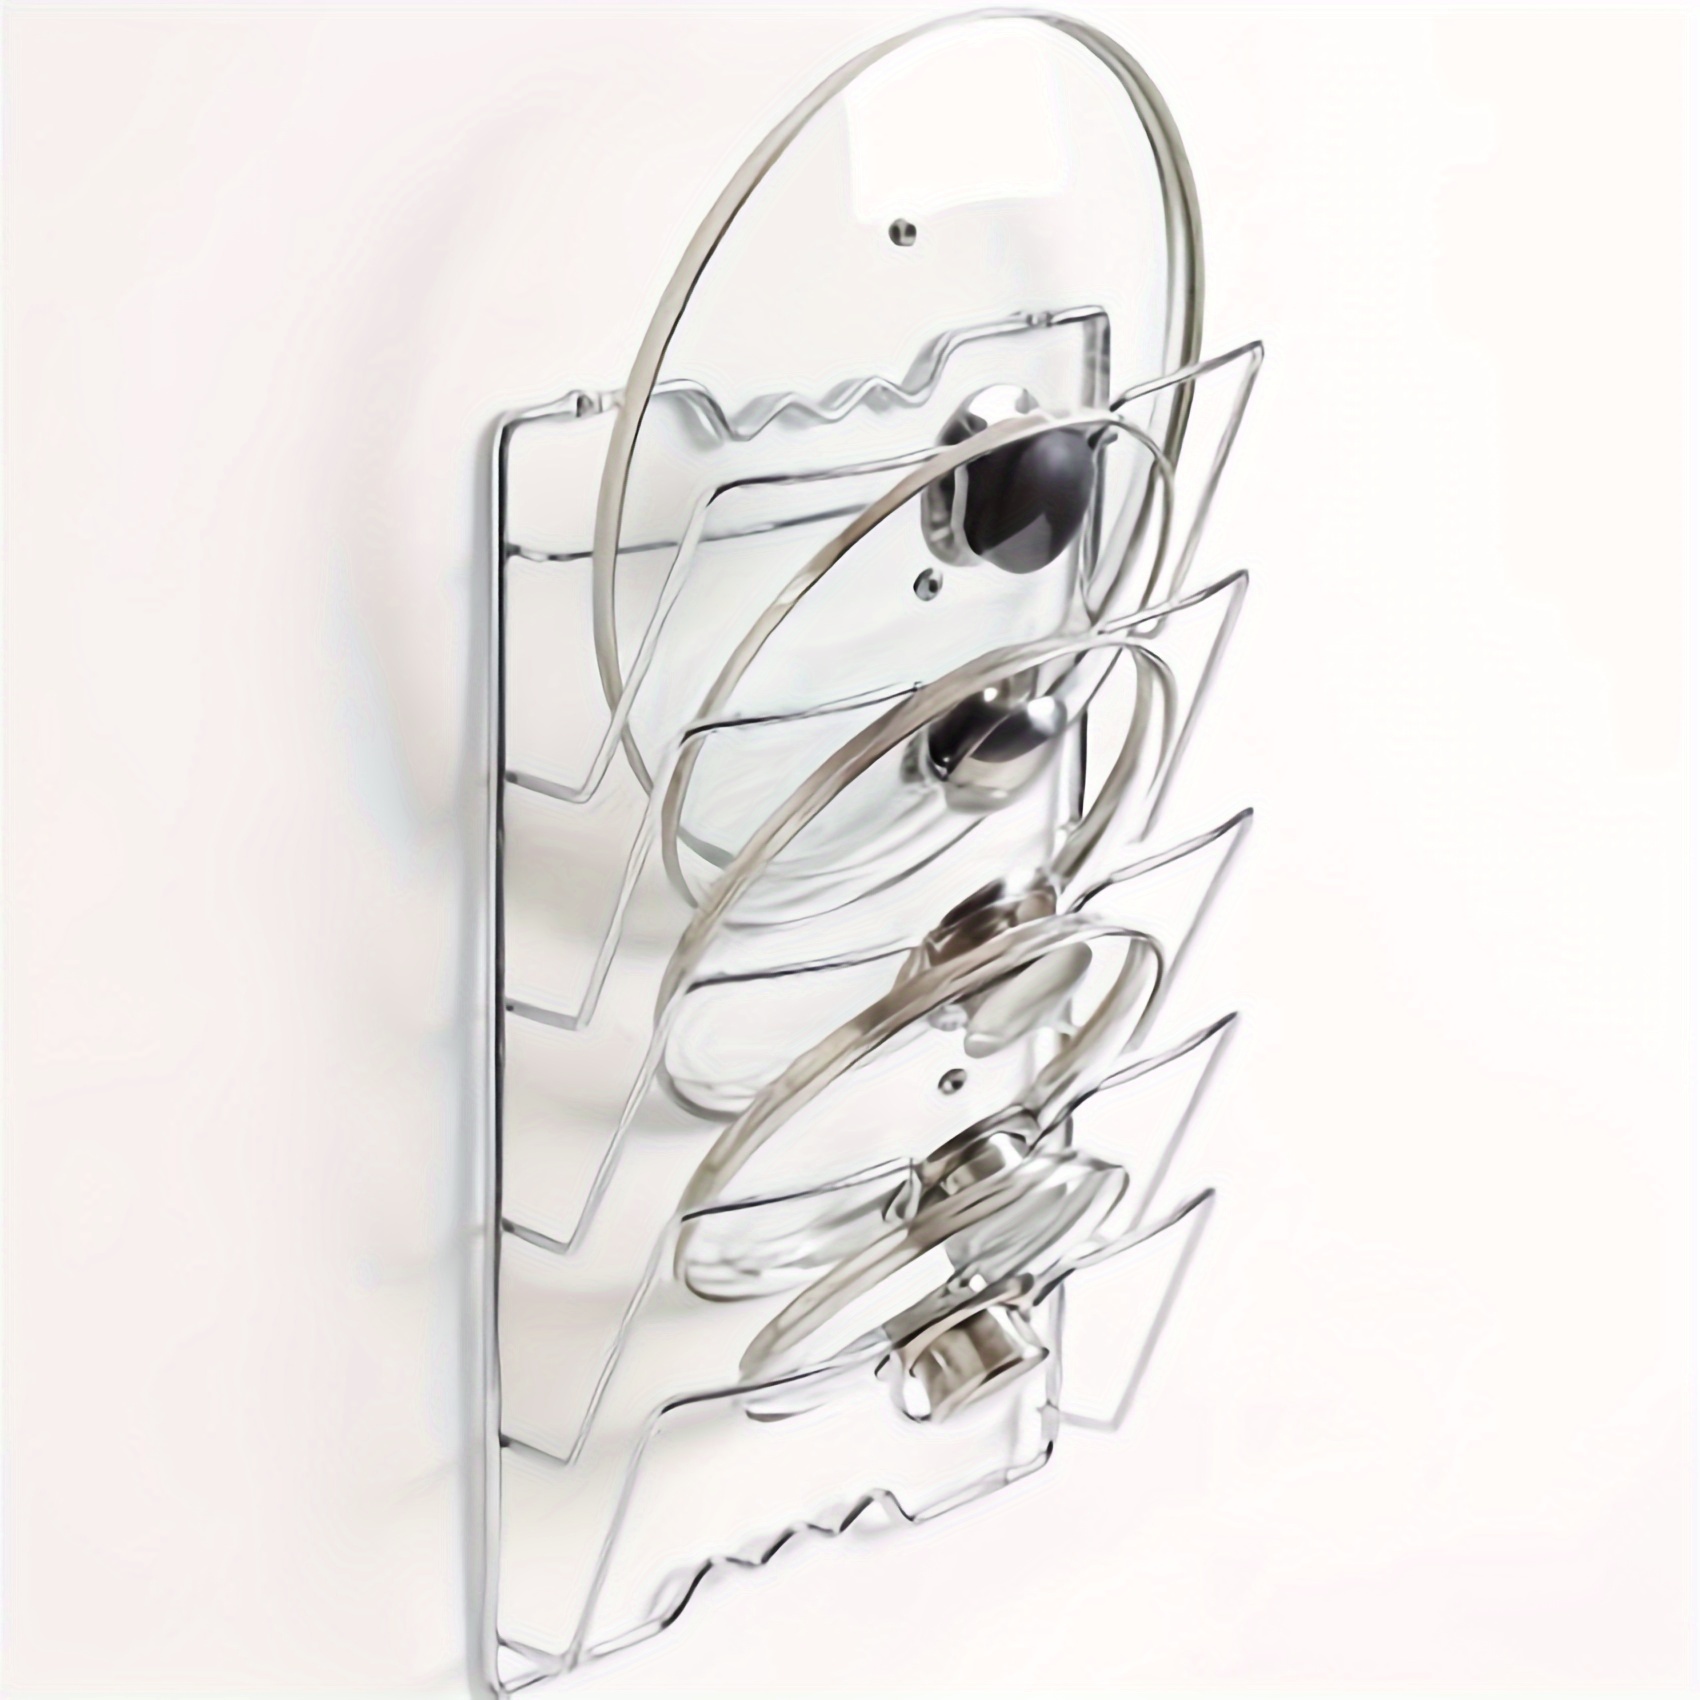 Wall or Cabinet Mount Lid Rack